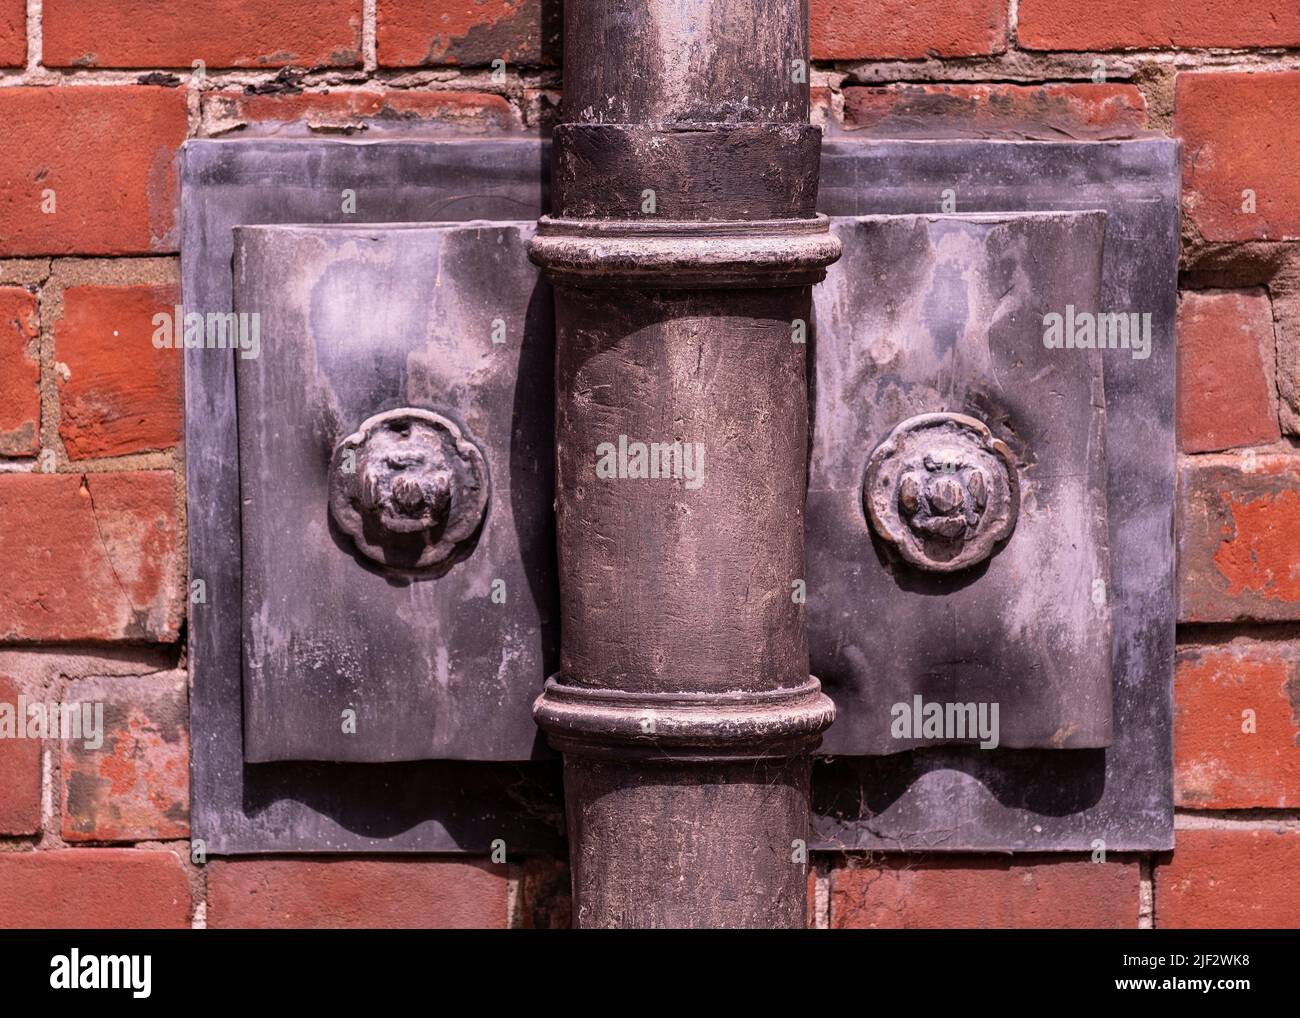 Ornate old fashioned lead down pipe and wall fixing for rain water Stock Photo